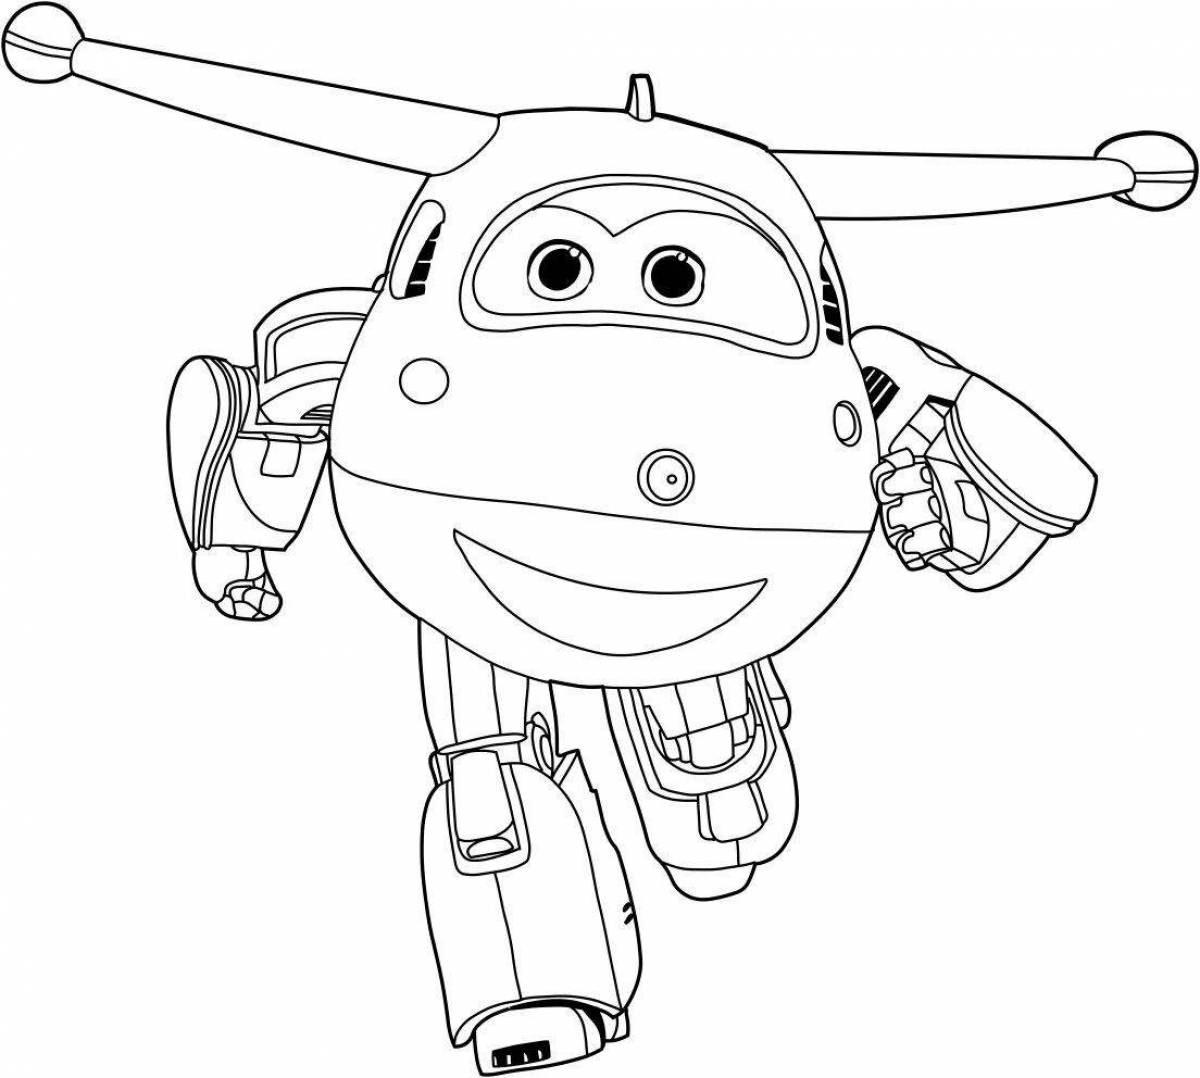 Super wings astra live coloring